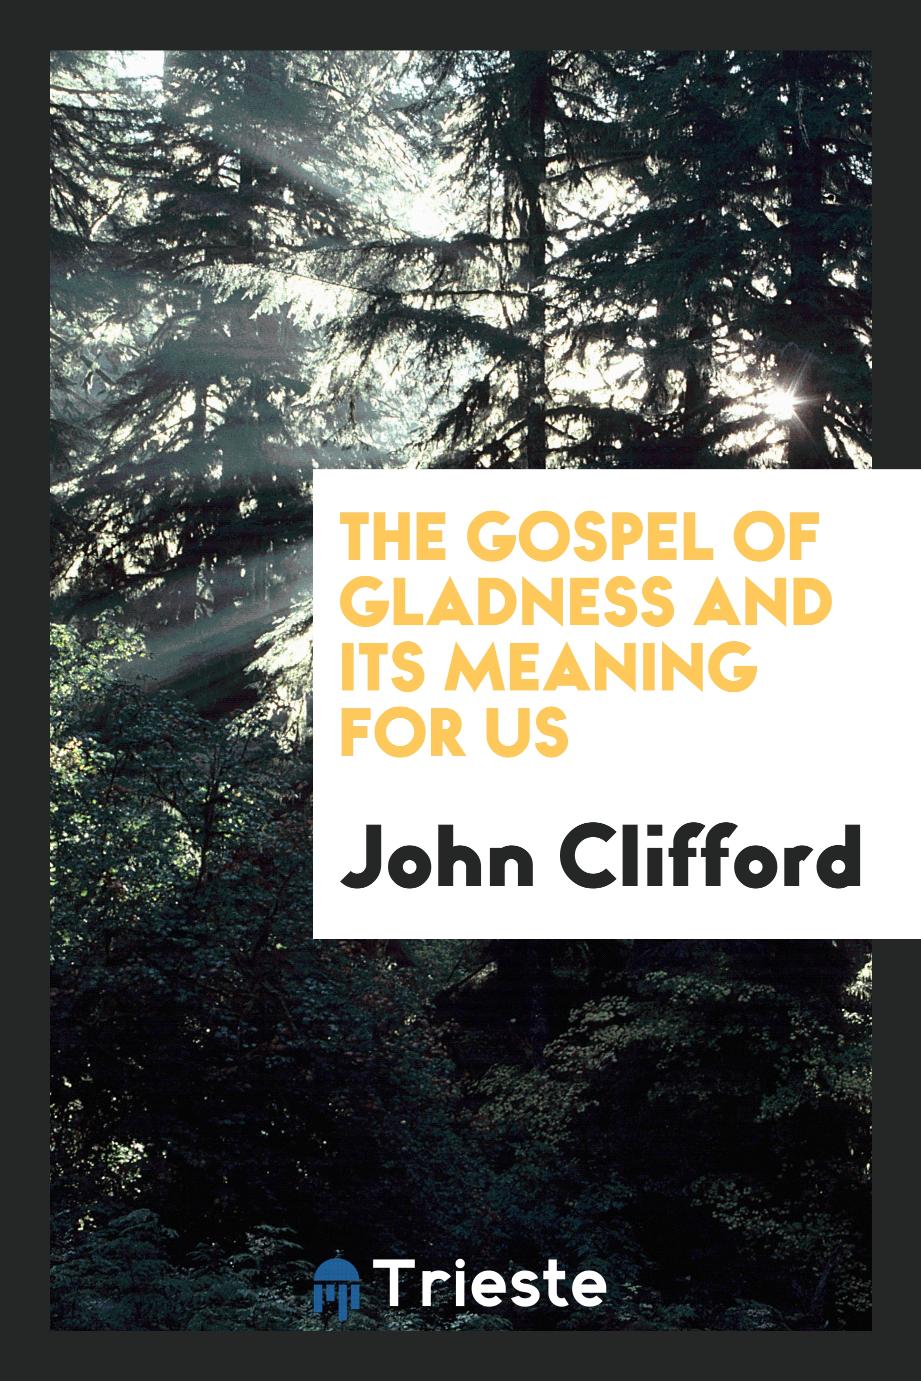 The gospel of gladness and its meaning for us